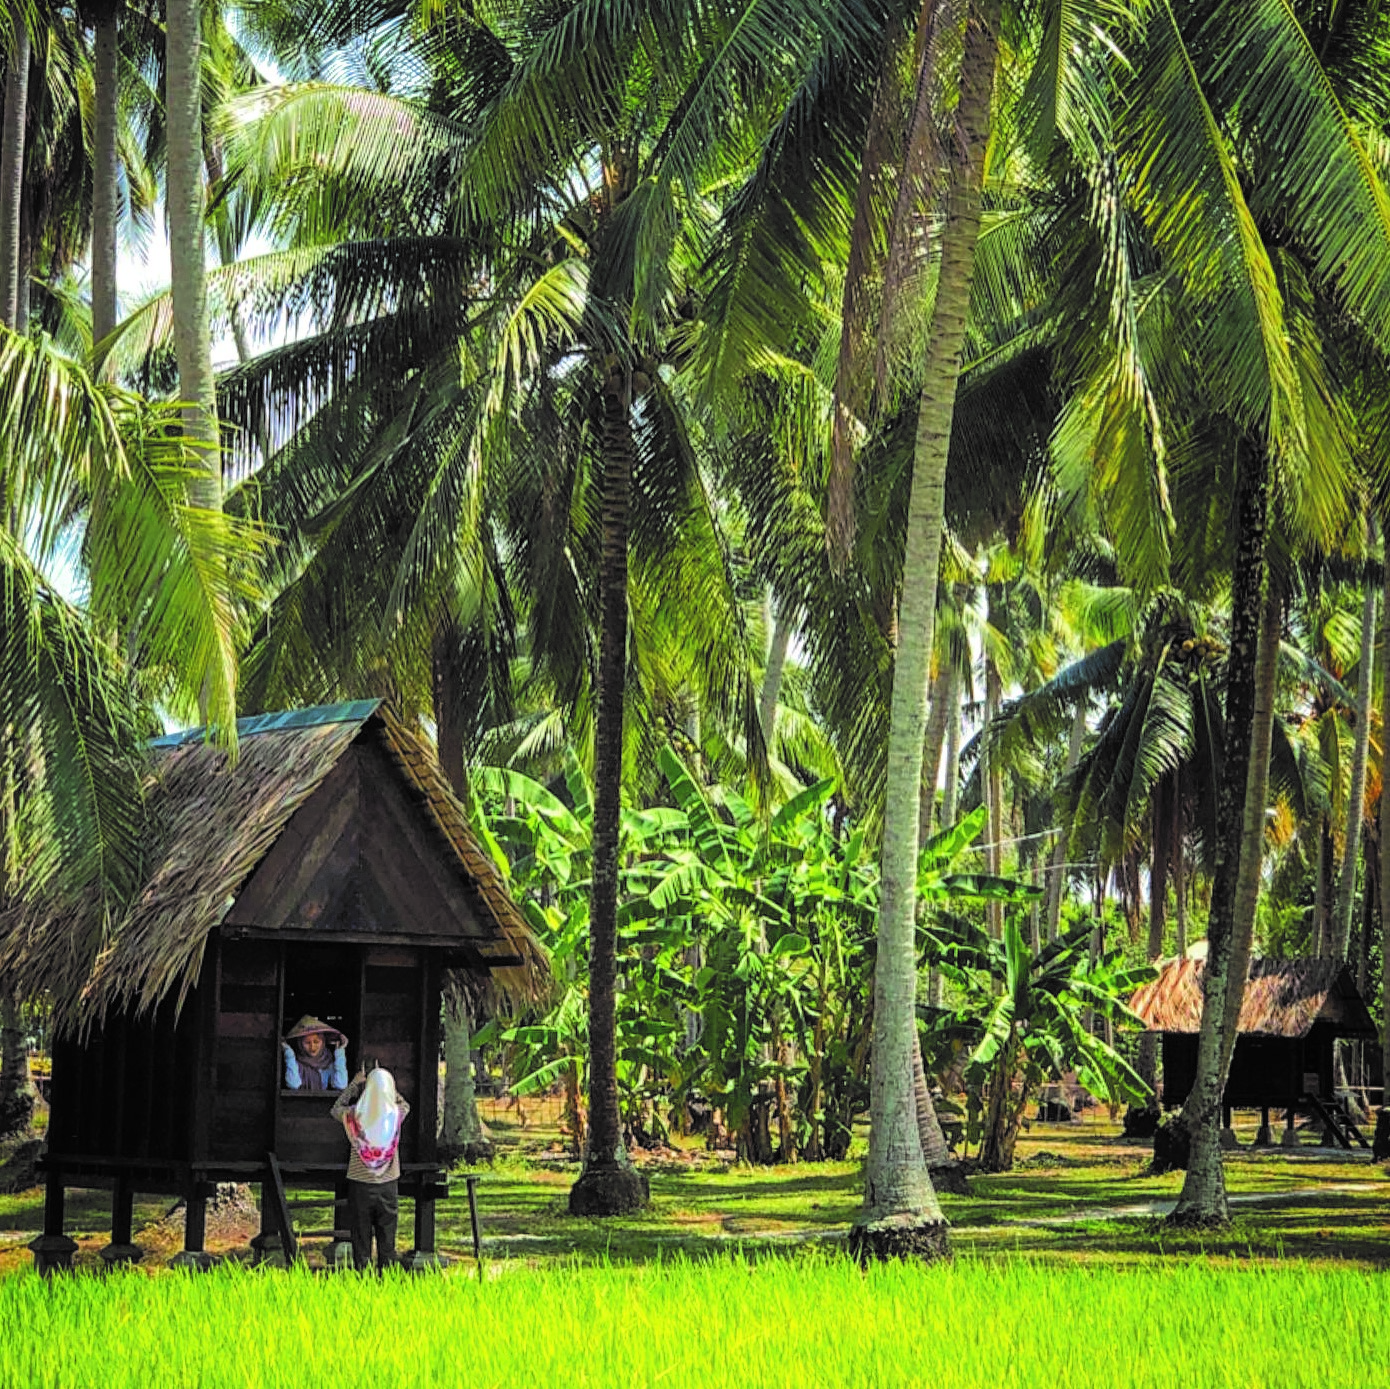 A wooden hut surrounded by tropical plantation